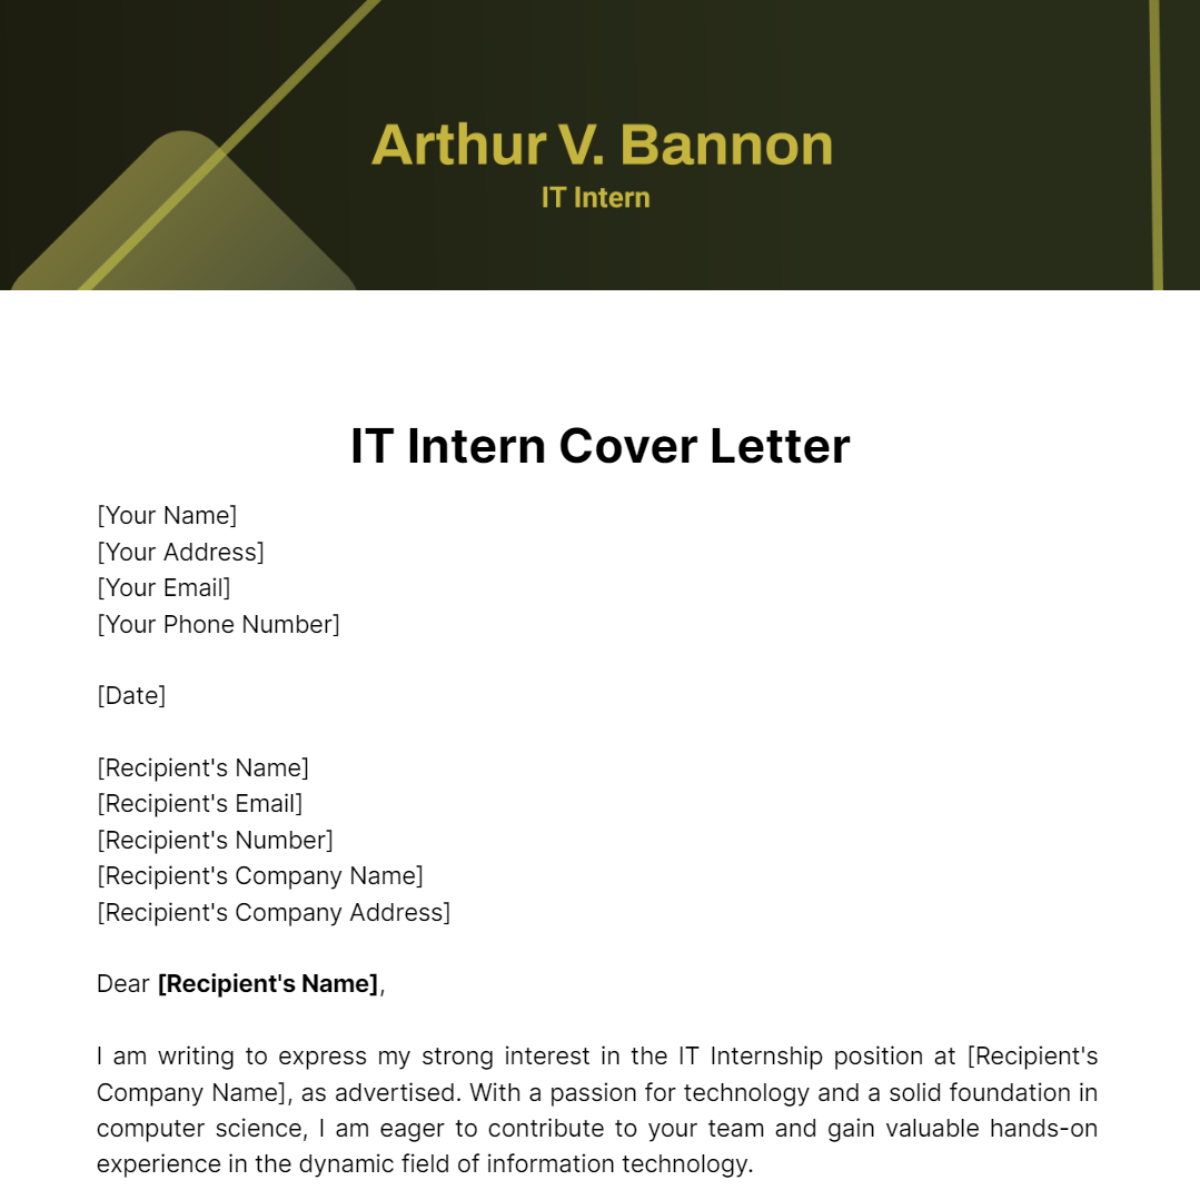 IT Intern Cover Letter Template